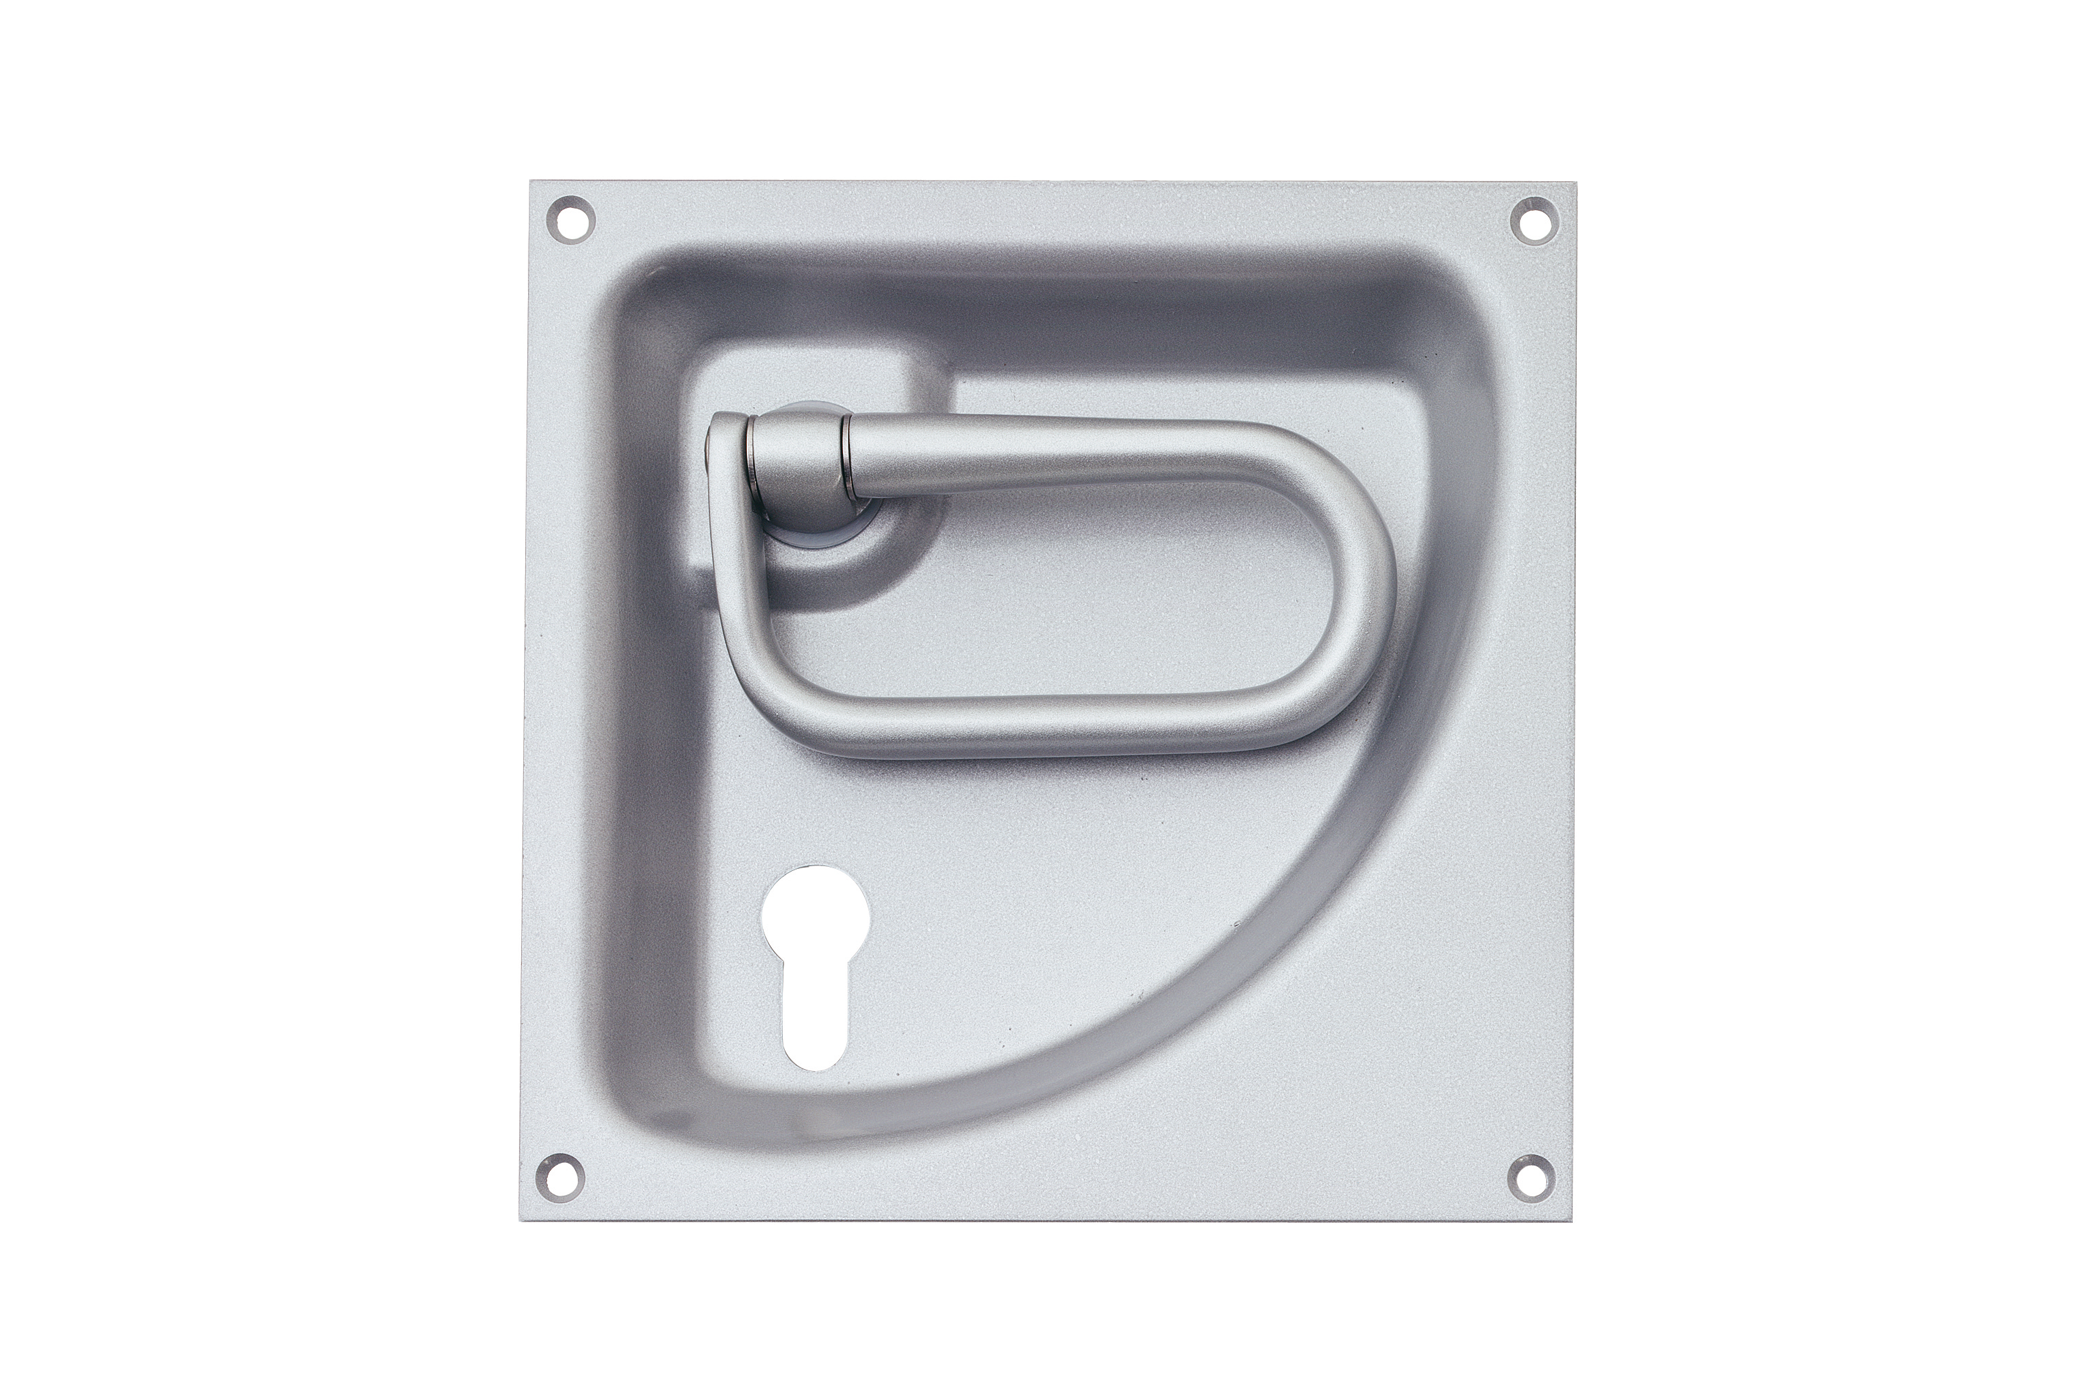 KWS Flush handle 5055 in finish 02 (steel/aluminium, silver stove-enamelled) for right-opening door with 72 mm PZ keyway